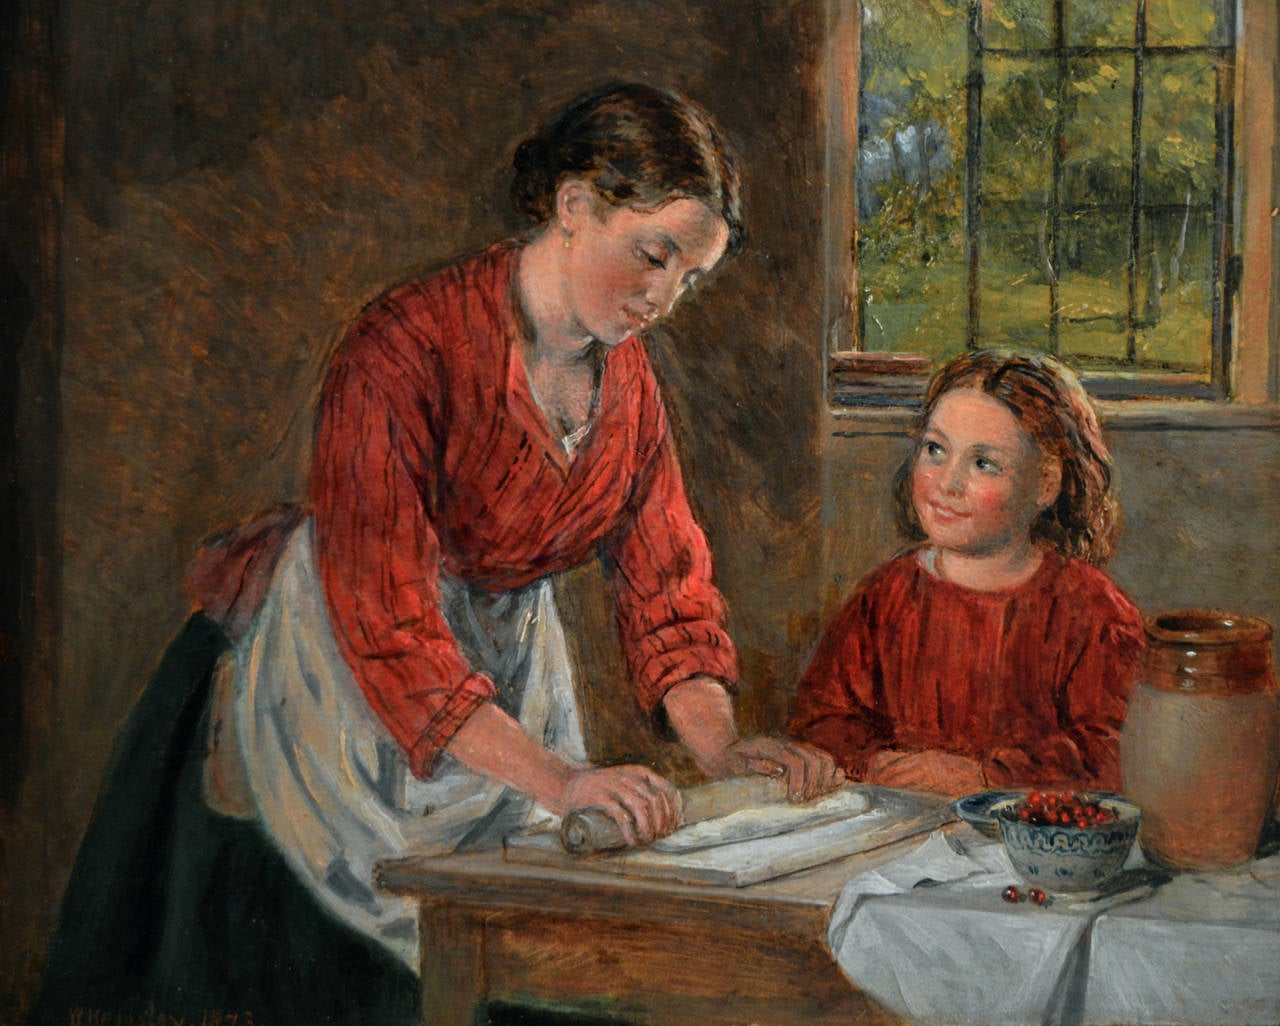 William Hemsley 
British, (1819-1906)
Cherry Pie 
Oil on panel, signed
Image size: 6½ inches x 7¾ inches 
Size including frame: 10¾ inches x 12 inches

William Hemsley was the son of an architect who was born in London. He initially trained